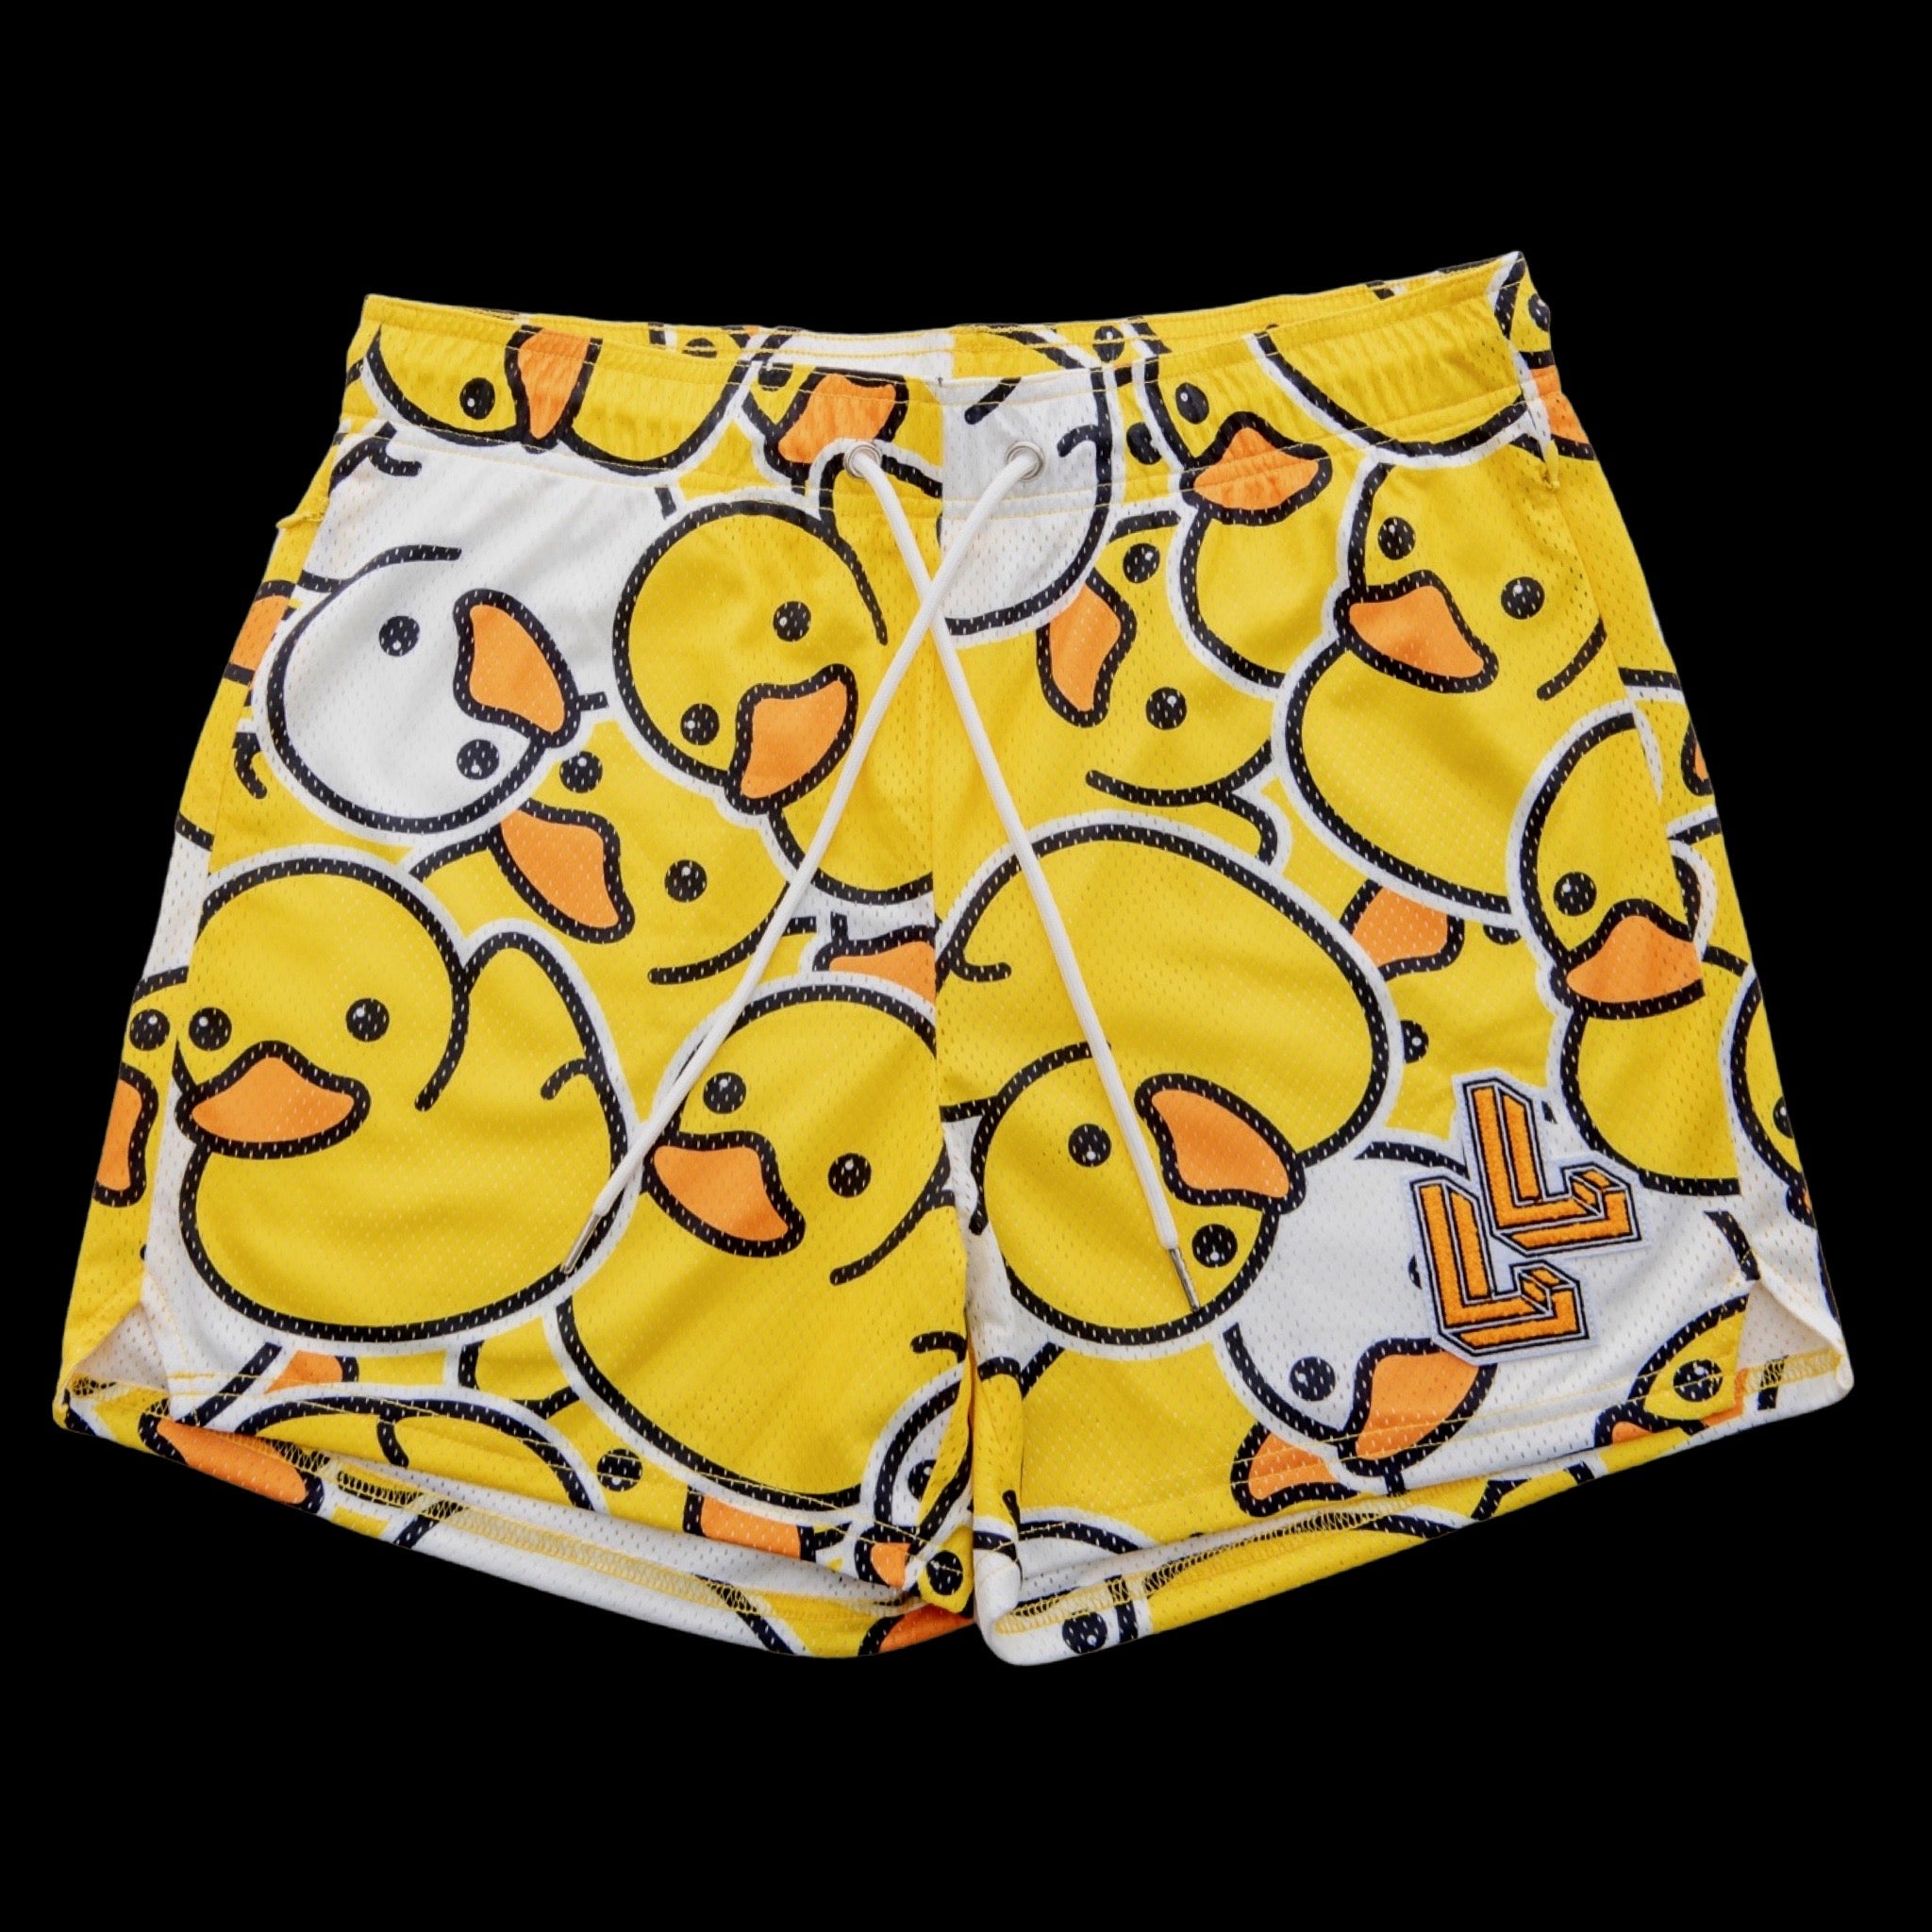 Ducky workout shorts